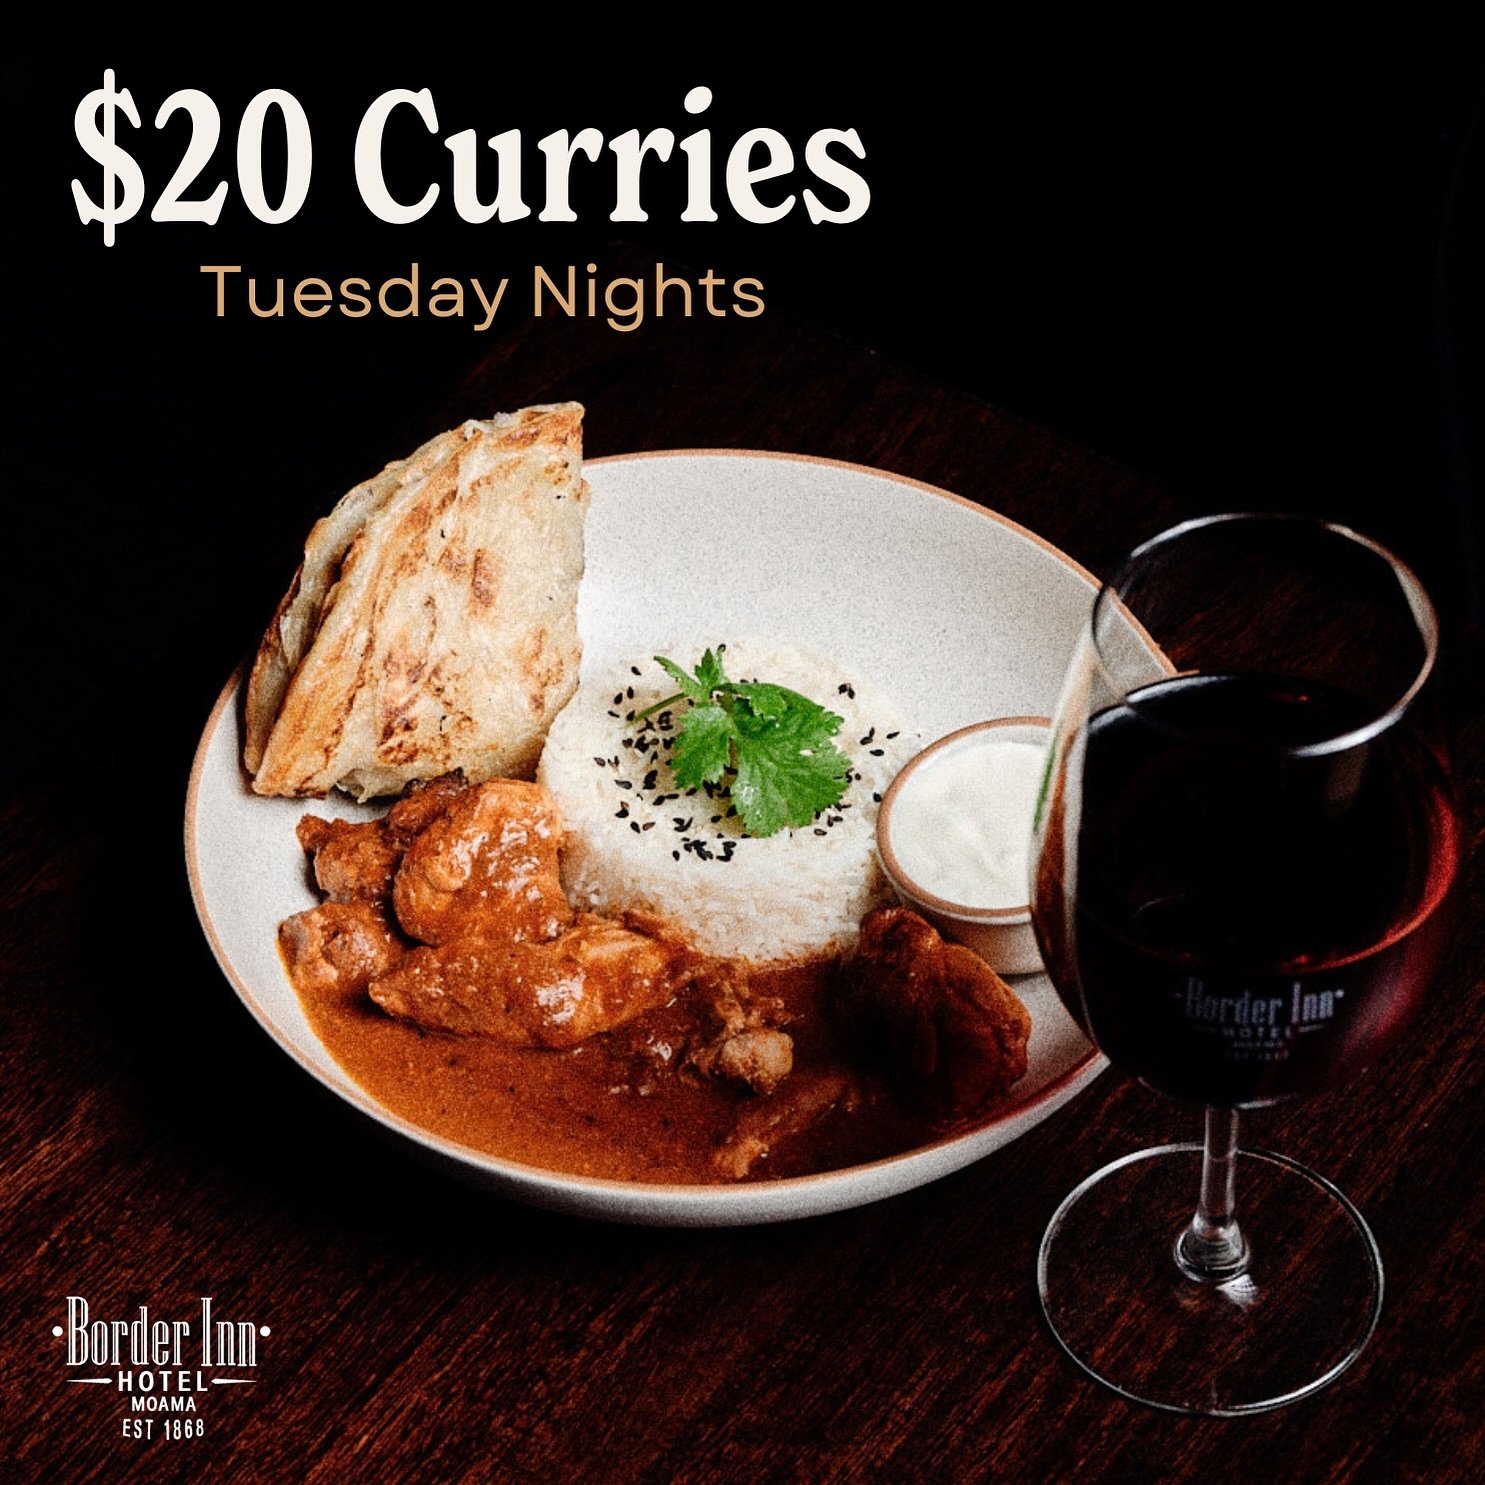 TUESDAY: $20 CURRY NIGHT AT THE BORDER INN HOTEL😋 

Leave the cooking to us! Explore our tasty curries every Tuesday, with new dishes to try every week (Always with a vegetarian option). 

See you @borderinnhotel 👌

#borderinnhotel #moama #moamansw